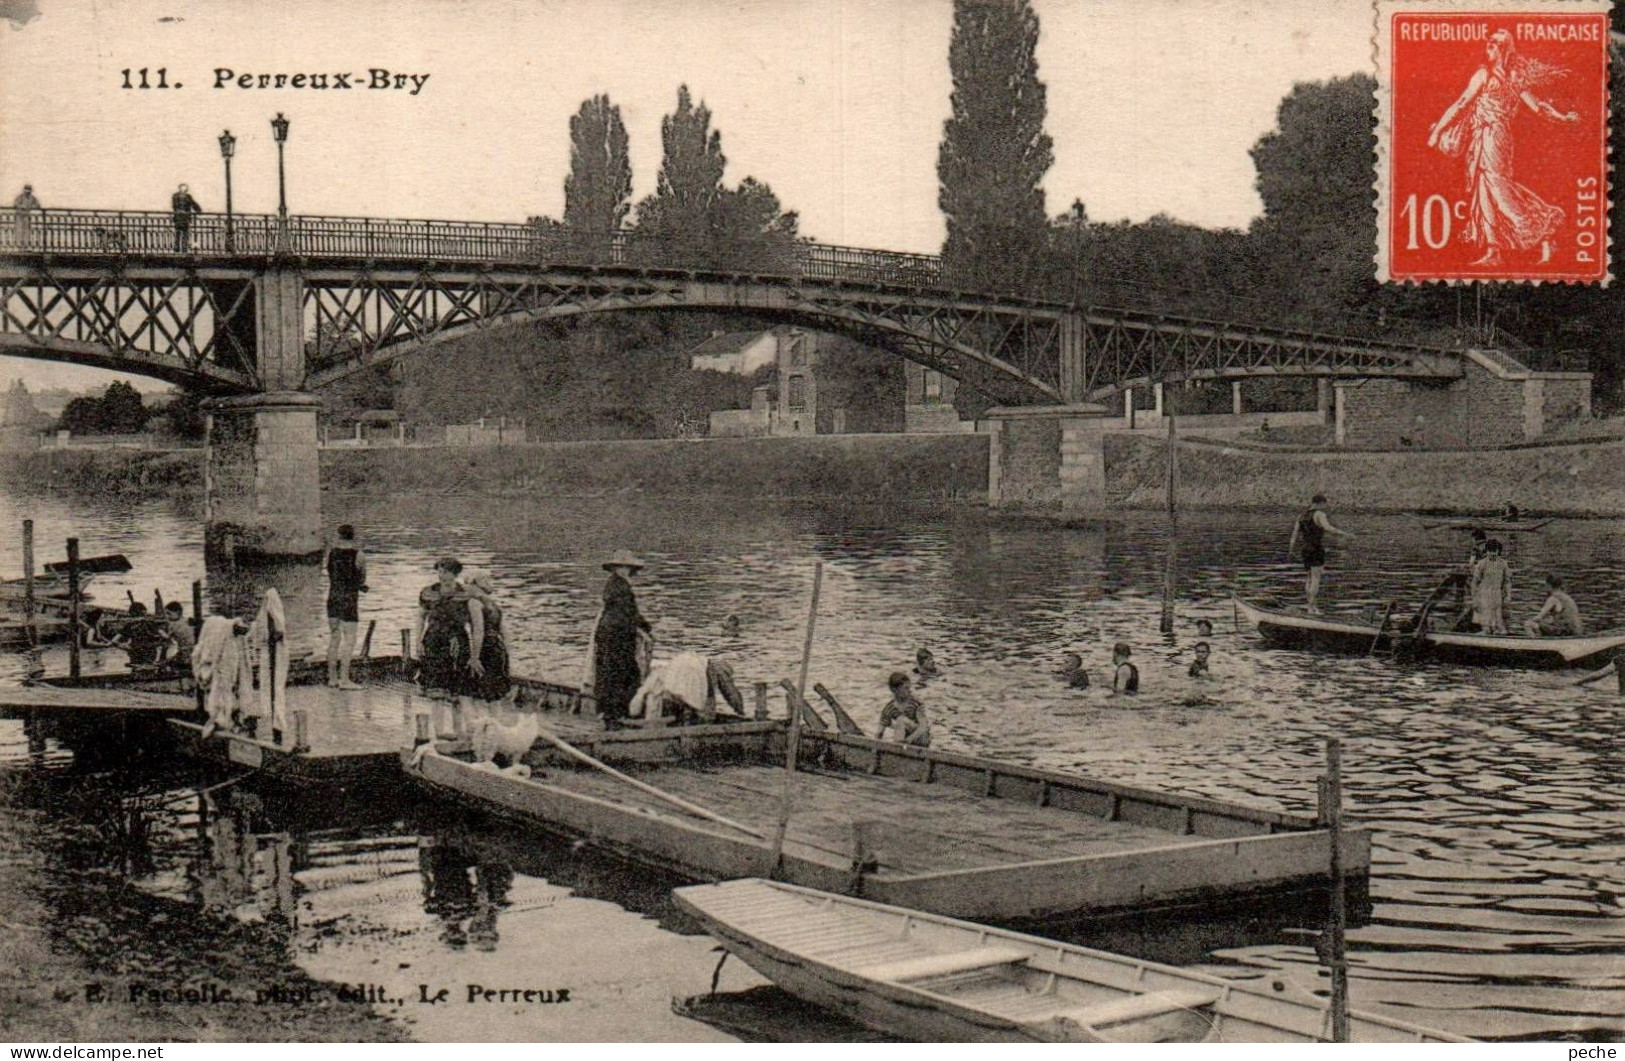 N°2811 W -cpa Perreux Bry - Le Perreux Sur Marne